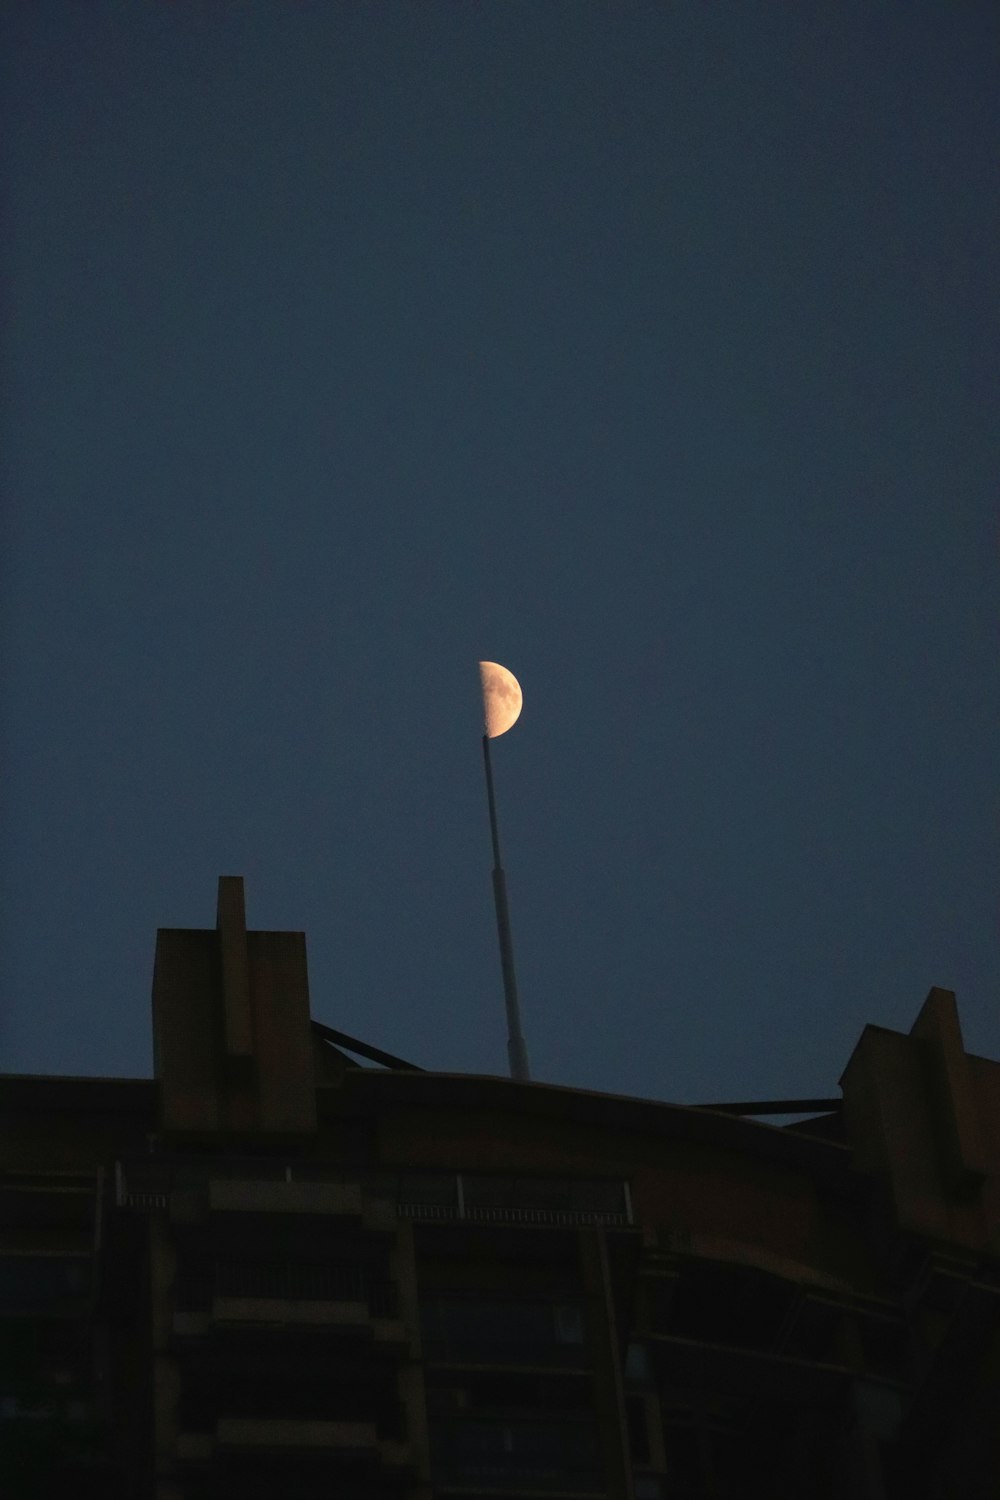 a view of the moon from the roof of a building